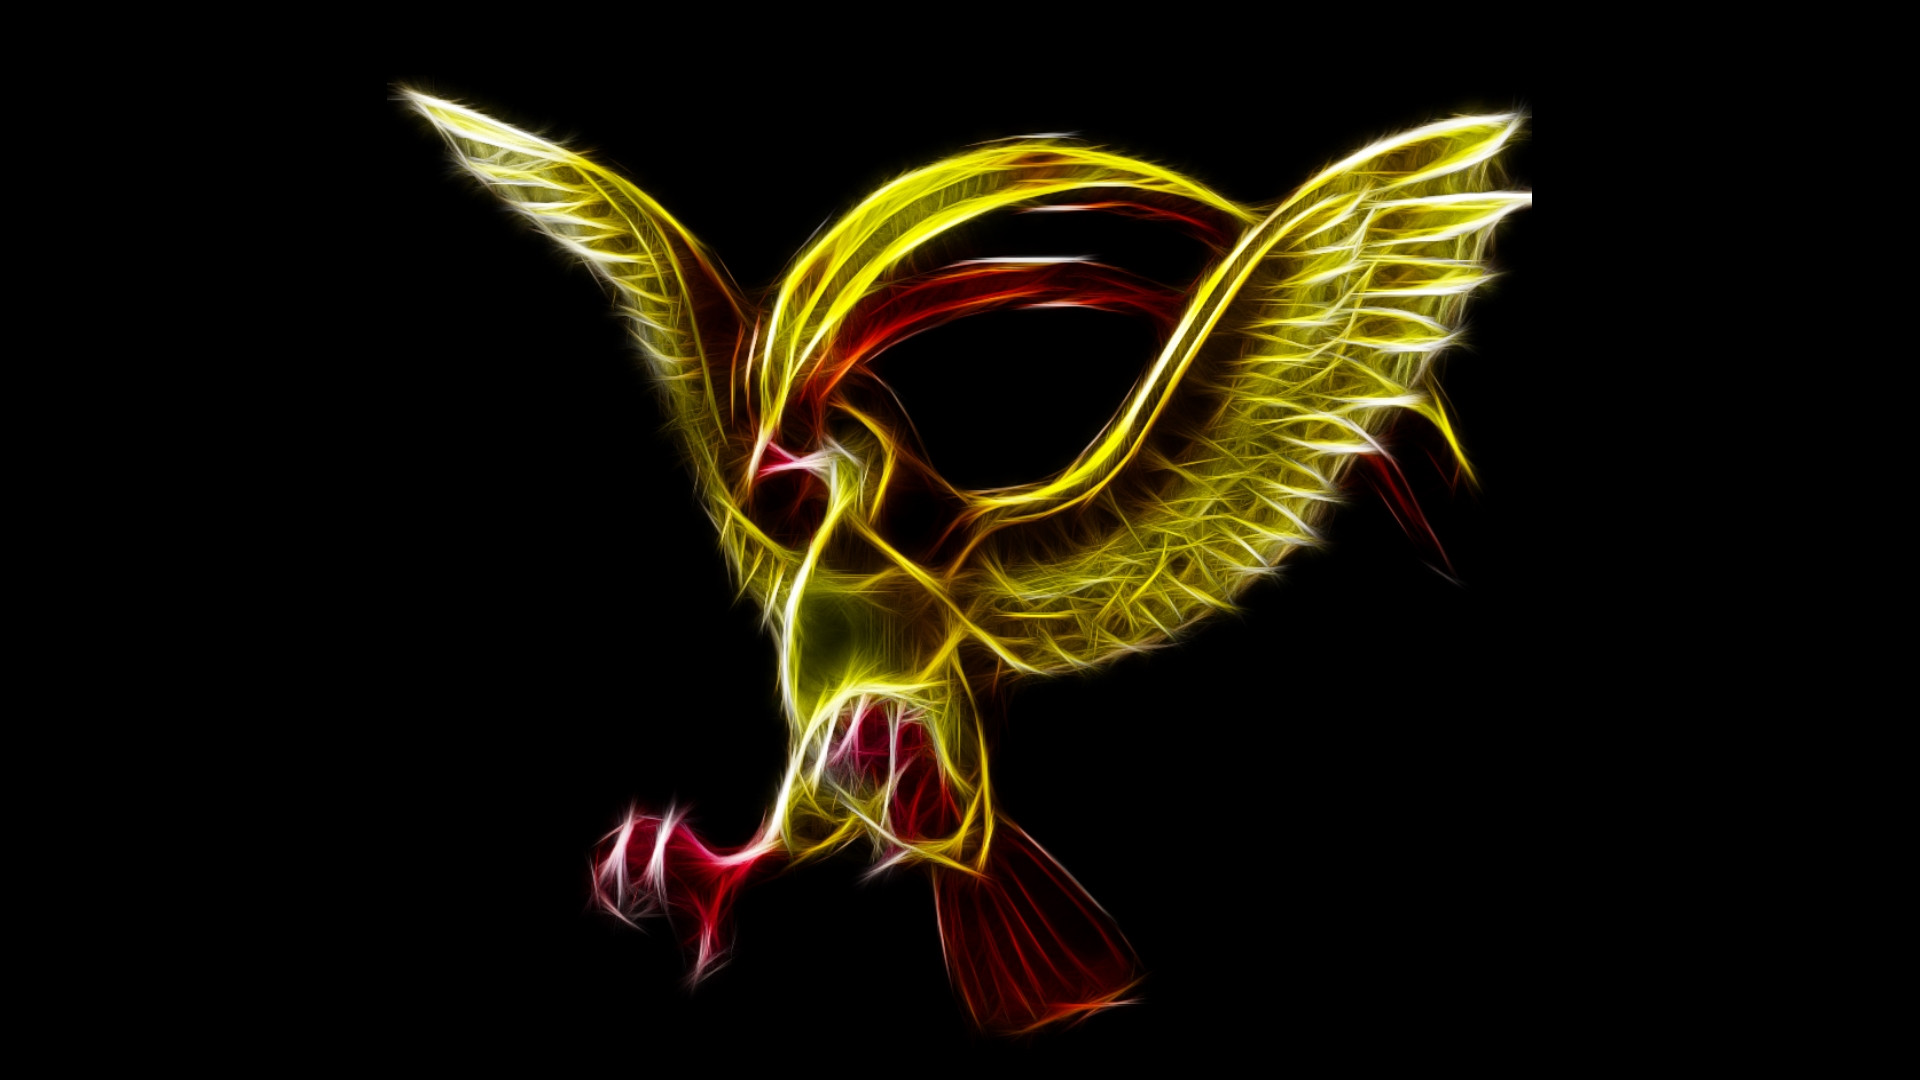 Could Someone Do An Overlay Of Pidgeot With The Mockingjay